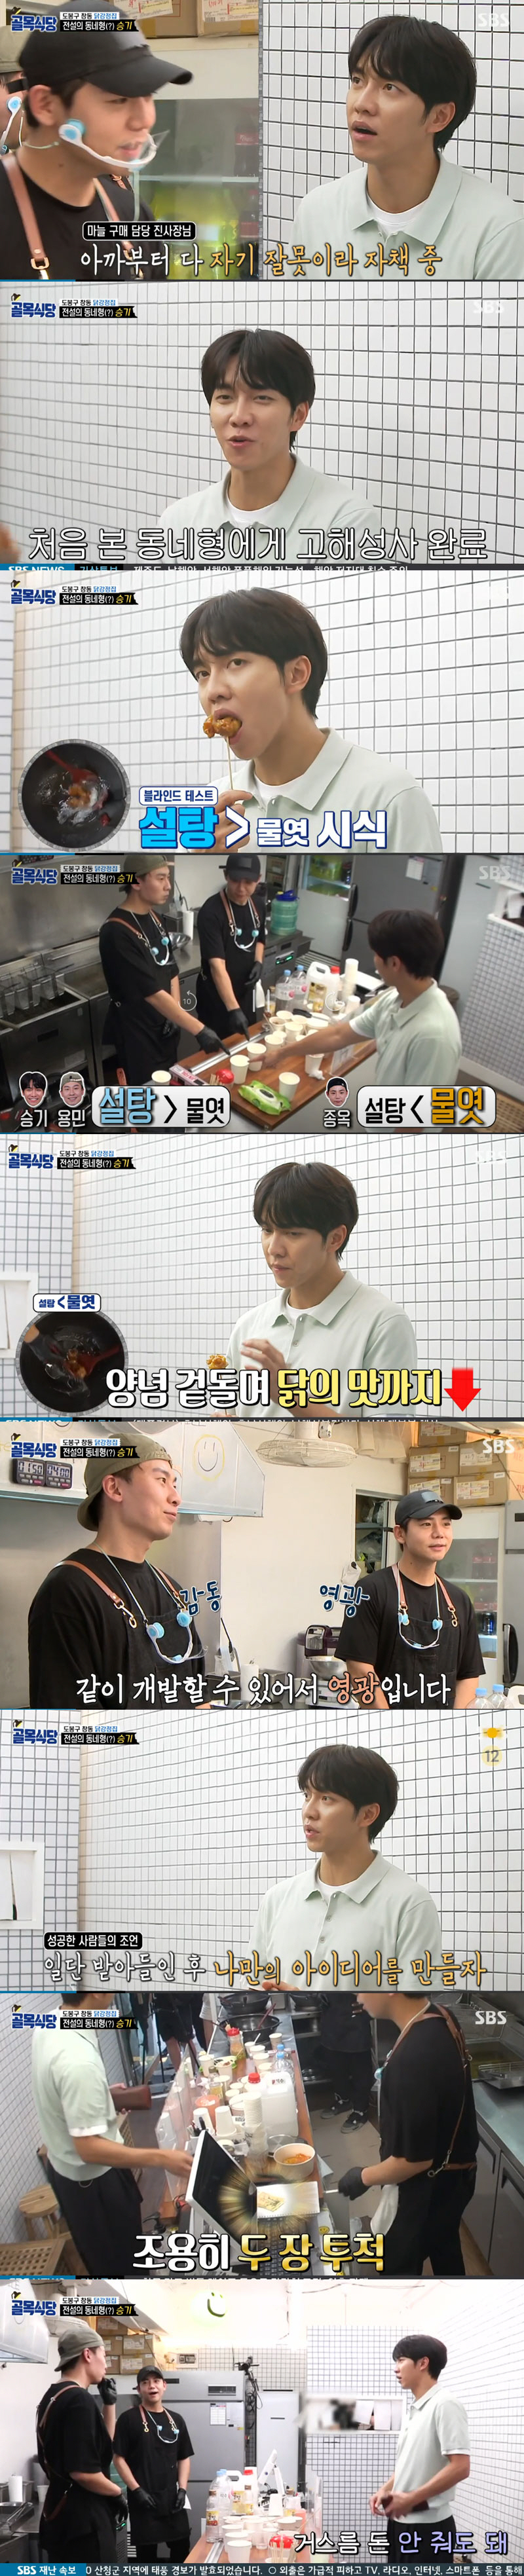 The ally restaurant Lee Seung-gi and Cho Kyuhyun were impressed with heartfelt advice and a taste evaluation.SBS Baek Jong-wons The alley restaurant broadcasted on the 26th was broadcast on the 25th alley Dobong-gu Changdong Alley.The Chicken Gangjeongjip bosses, who had captivated the heart of Baek Jong-won with their brilliant gestures, angered Baek Jong-won with their garlic, despite the fact that Baek Jong-won repeatedly emphasized the importance of garlic management.I was not interested in their food in the first place, and the words are too advanced, said Baek Jong-won. If you do not keep the basics, it is a play and an act.At that time, Lee Seung-gi visited the Chicken Gangjeong House after receiving a special mission from Baek Jong-won.First, Lee Seung-gi relaxed the bosses, and the boss laughed at Lee Seung-gi, saying, In fact, it seems to be tears when I say it now.Lee Seung-gi has worked on research by conducting blind tests of three chicken gangjeongs to help the bosses studying the texture of chicken gangjeong.Lee Seung-gi said, Chicken Gangjeong is the first chicken to taste sweet, he said seriously. Even when you chew more sugar than syrup, you feel like it is a chicken.At this time, Lee Seung-gi gently led the correct answer after collecting opinions, and gave sincere advice to the bosses as a local brother and senior in life.In particular, Lee Seung-gi handed over two 50,000 won worth of you have to calculate it. Lee Seung-gi said, You dont have to give me change.It is a broadcast, so it is more like that.  If you have a lot of it, buy more materials and practice more. In addition, Cho Kyuhyun, who shined in the first two visits to The Alley Restaurant, found NO Delivery Pizza House with Hong Seok-min, an acquaintance and singer-songwriterI found NO delivery Pizza house with a look of excitement of Baek Jong-won, but I could not hide my frustration because I did not know the principle in the process of cooking the changed Pizza.After Baek Jong-wons eye-level education, can the boss show Pizza as he learned?The boss started his first new menu with the advent of Cho Kyuhyun, and first Cho Kyuhyun tasted a tuna he had never heard of.Cho Kyuhyun said, I do not feel it, but I feel impressed and I do not think it is like this.Also, about Salami Pizza, I do not think the taste of red pepper oil is very good, he said.I do not know what is more special because the pepper oil goes in. At that time, Cho Kyuhyun suggested to the boss to bake Pizza at a high temperature, so Baek Jong-won called Cho Kyuhyun and said, You seem to be correct. He pointed out that the boss increased the amount of toppings as he habitually did.The boss made Pizza again as he learned, and Cho Kyuhyun smiled, saying, Its more sullen, it seems to be less bland than before. Its not tough. Balance is so good.Lee Seung-gi and Cho Kyuhyun attracted attention with their unique performance, boasting their personality charm.